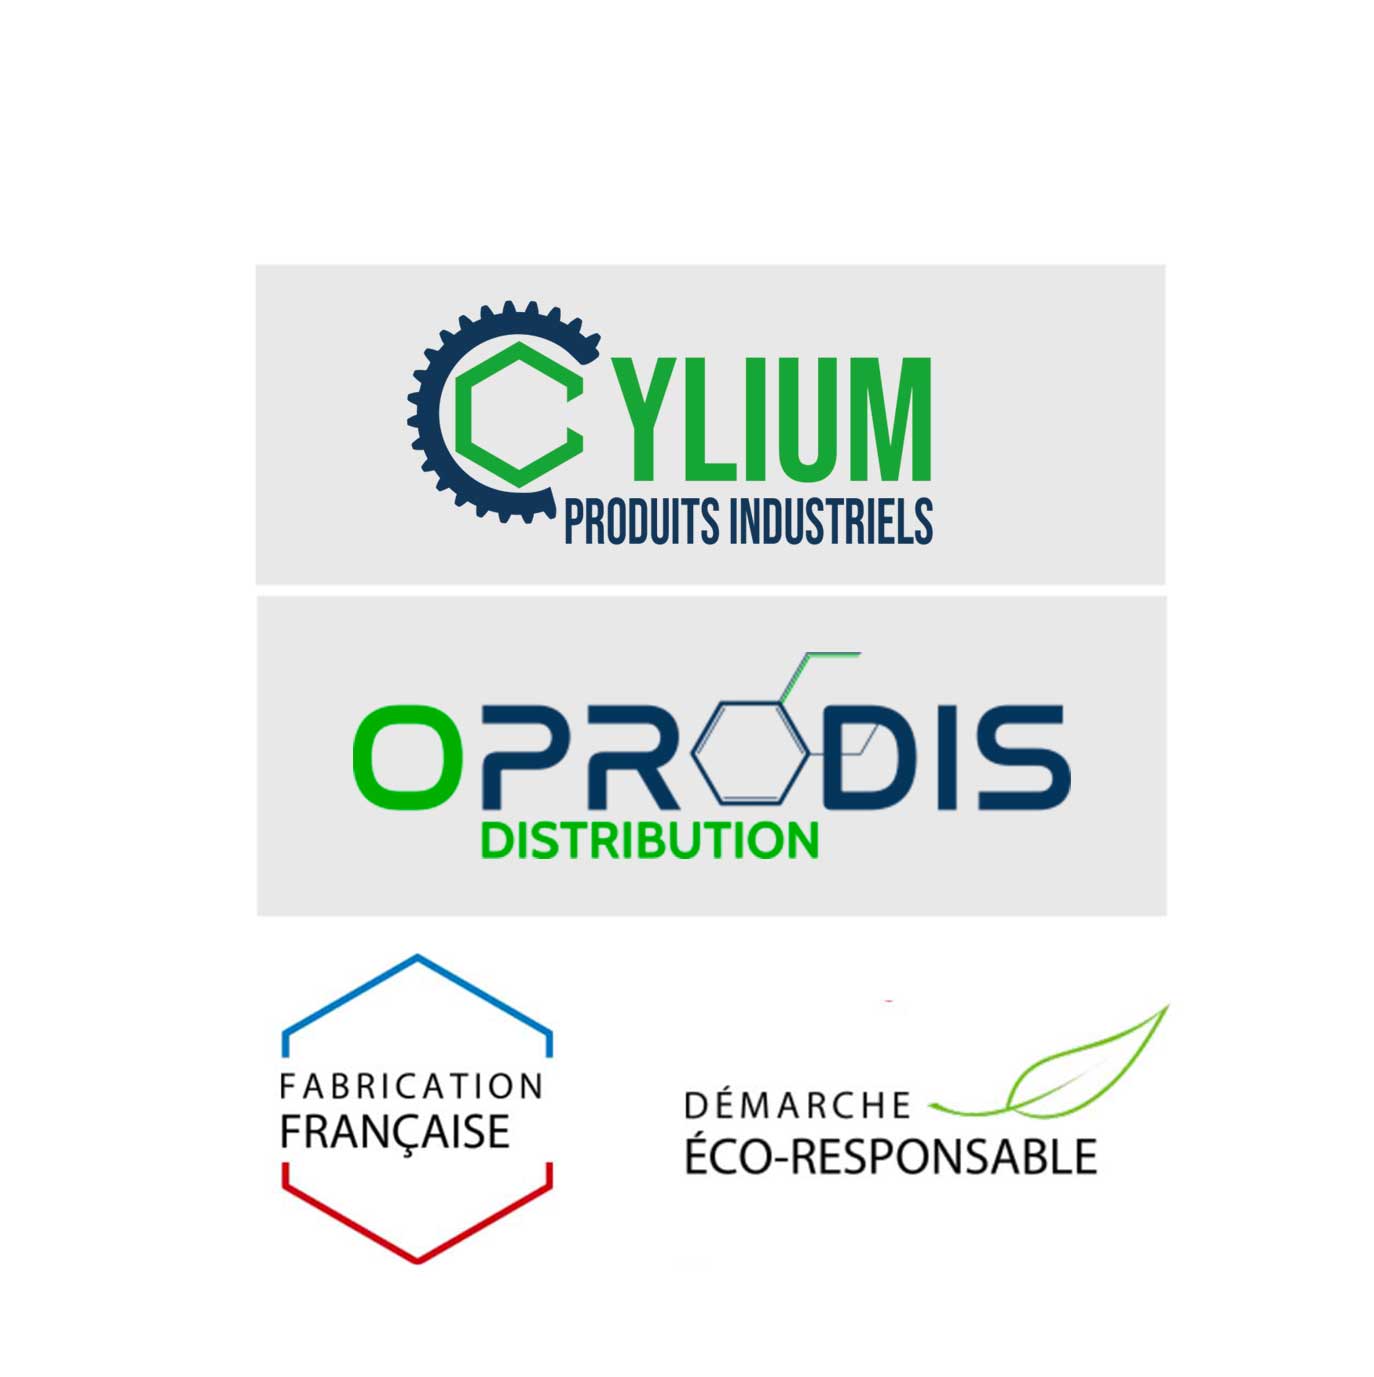 CYLIUM By Oprodis, qui sommes-nous ?